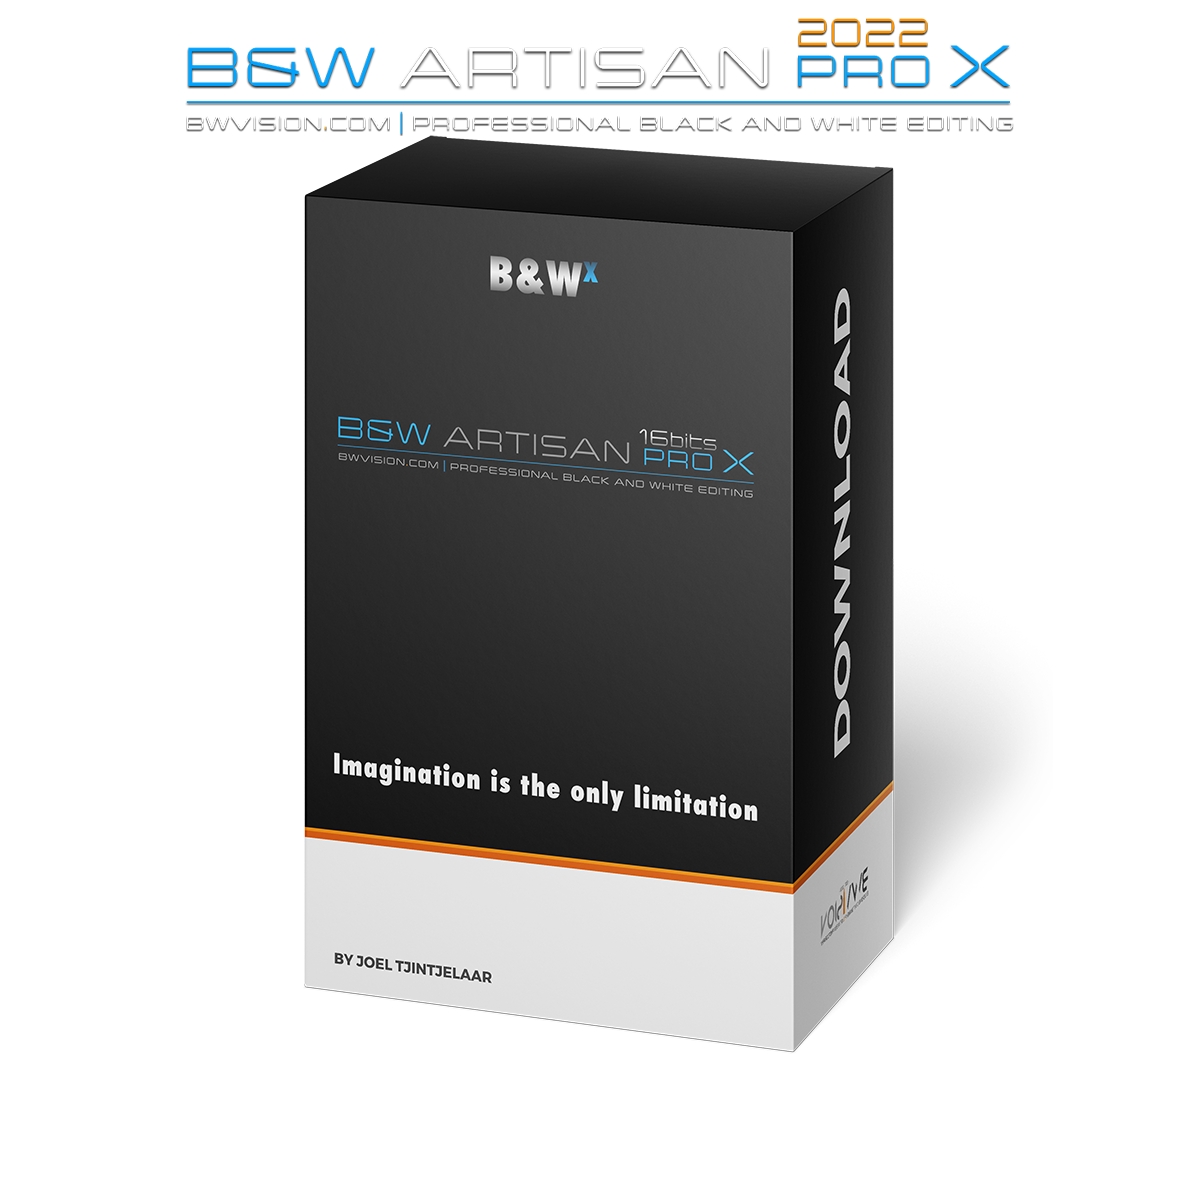 B&W Artisan Pro Panel for Photoshop Professional Black and White Editing Software